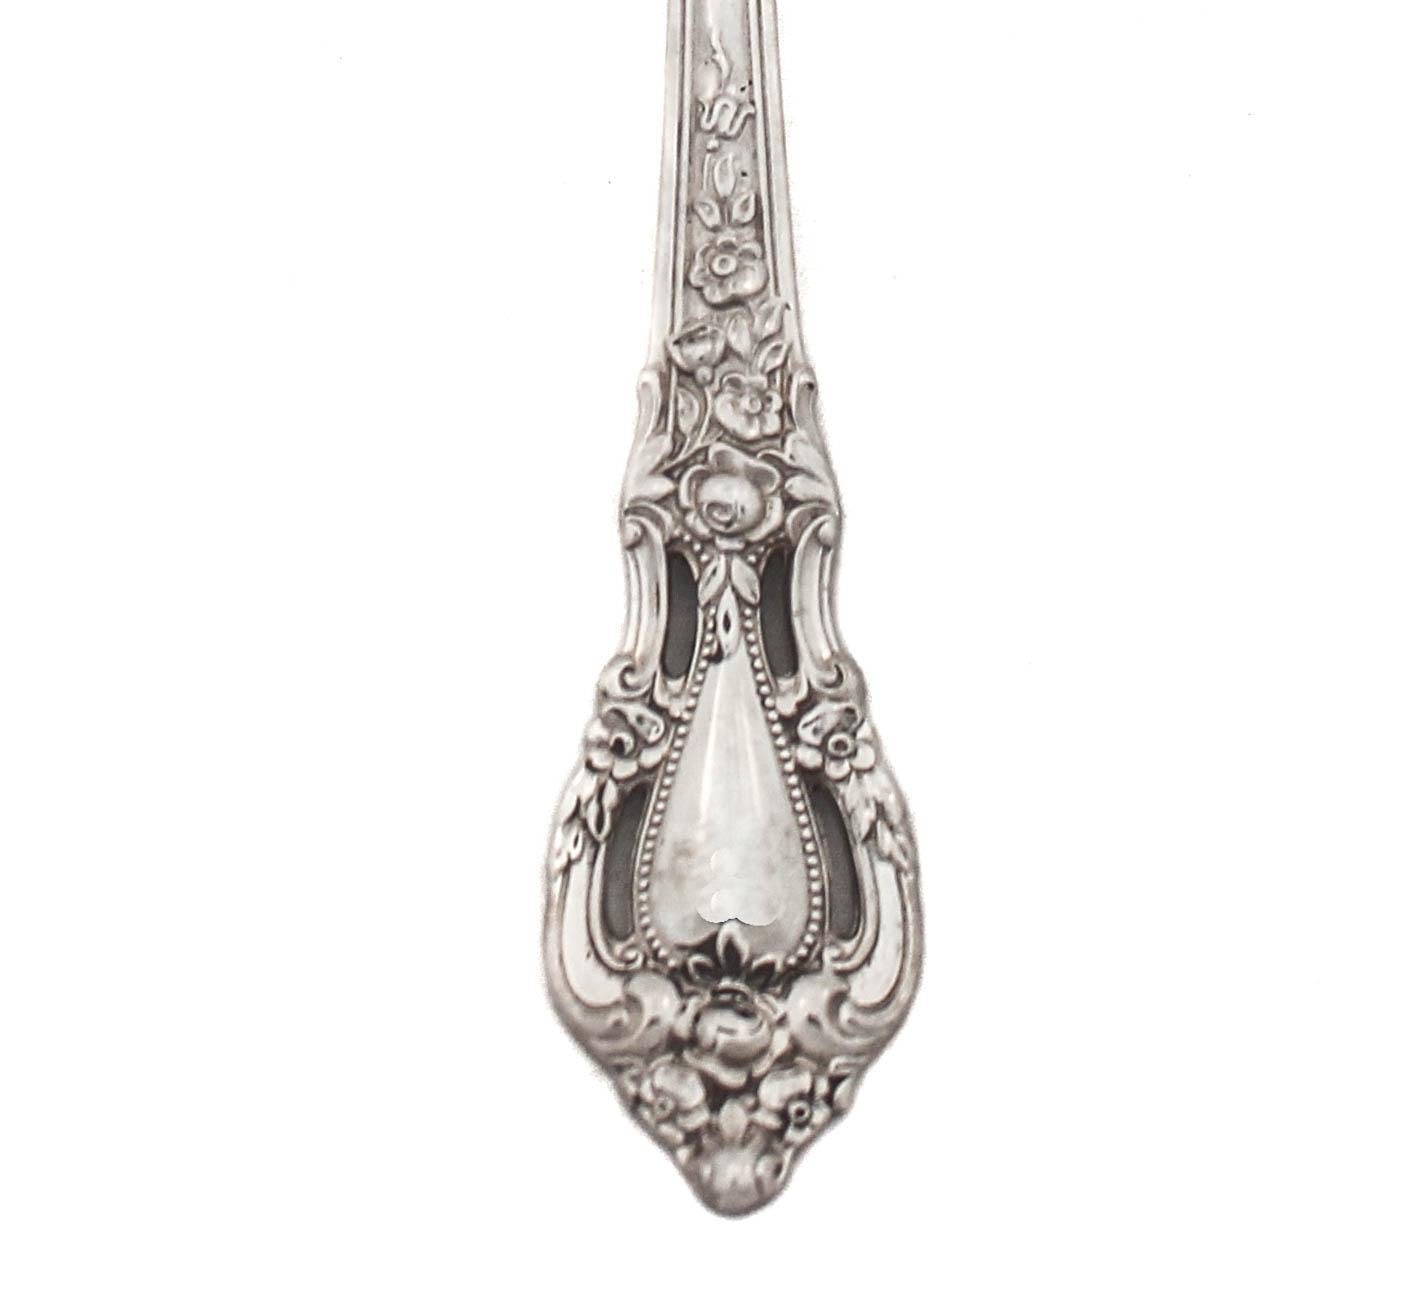 American Sterling Silver “Eloquence” Server For Sale